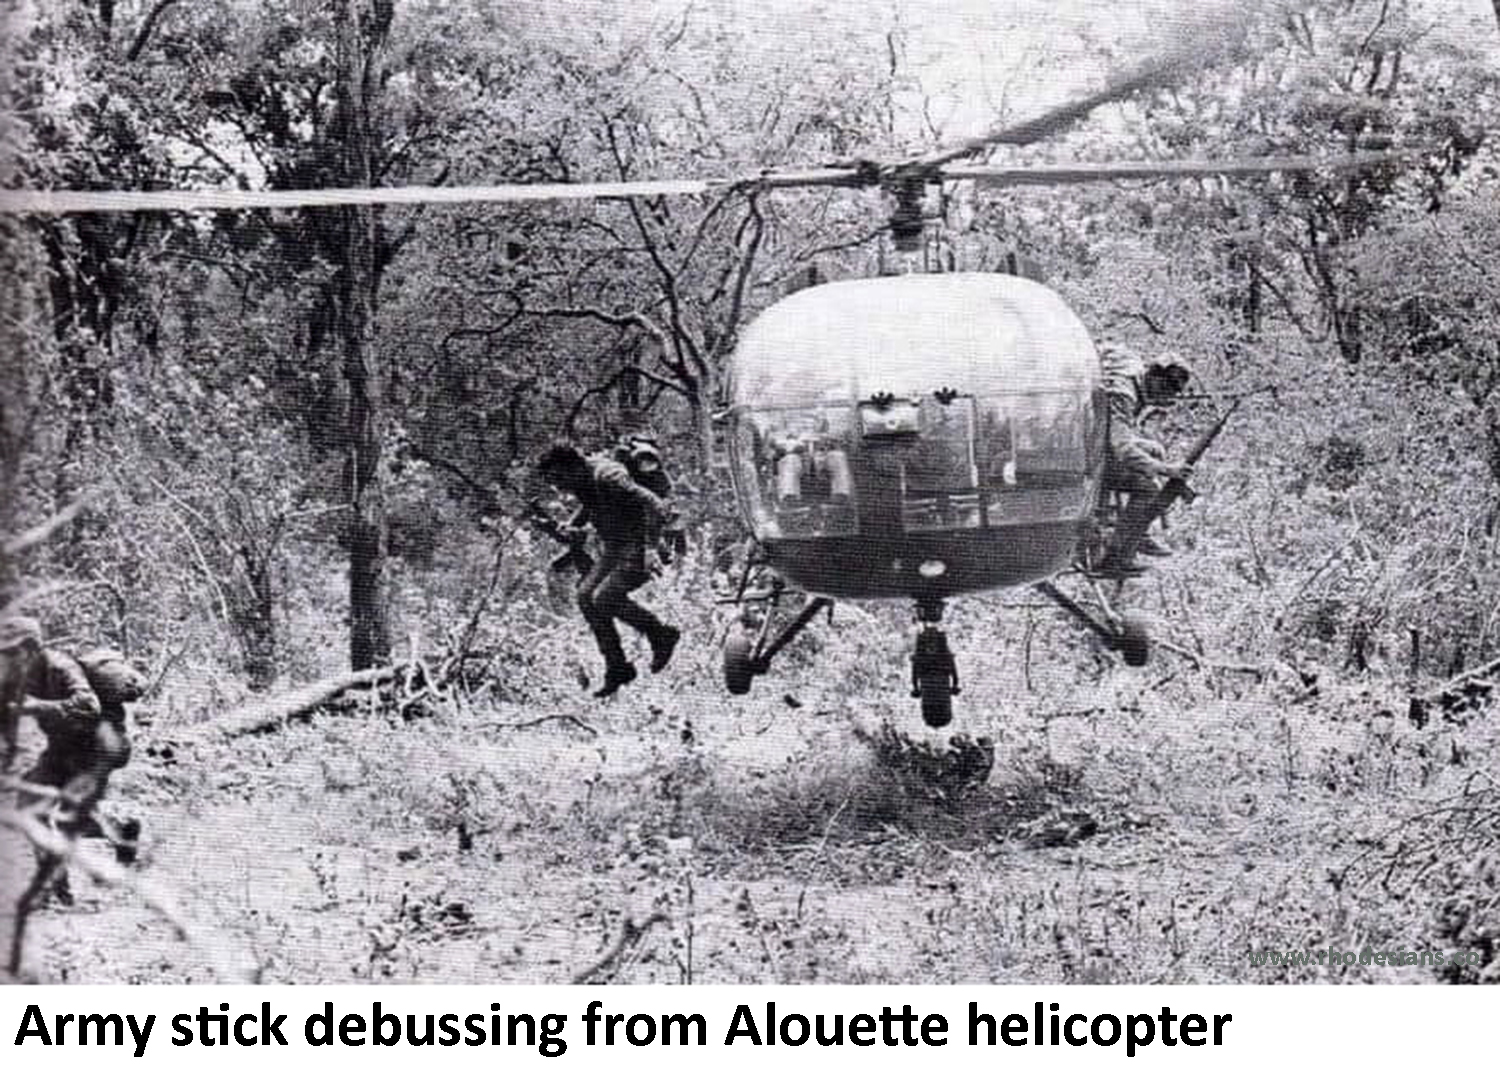 Army stick debusses from Alouette helicopter during Rhodesian Bush War